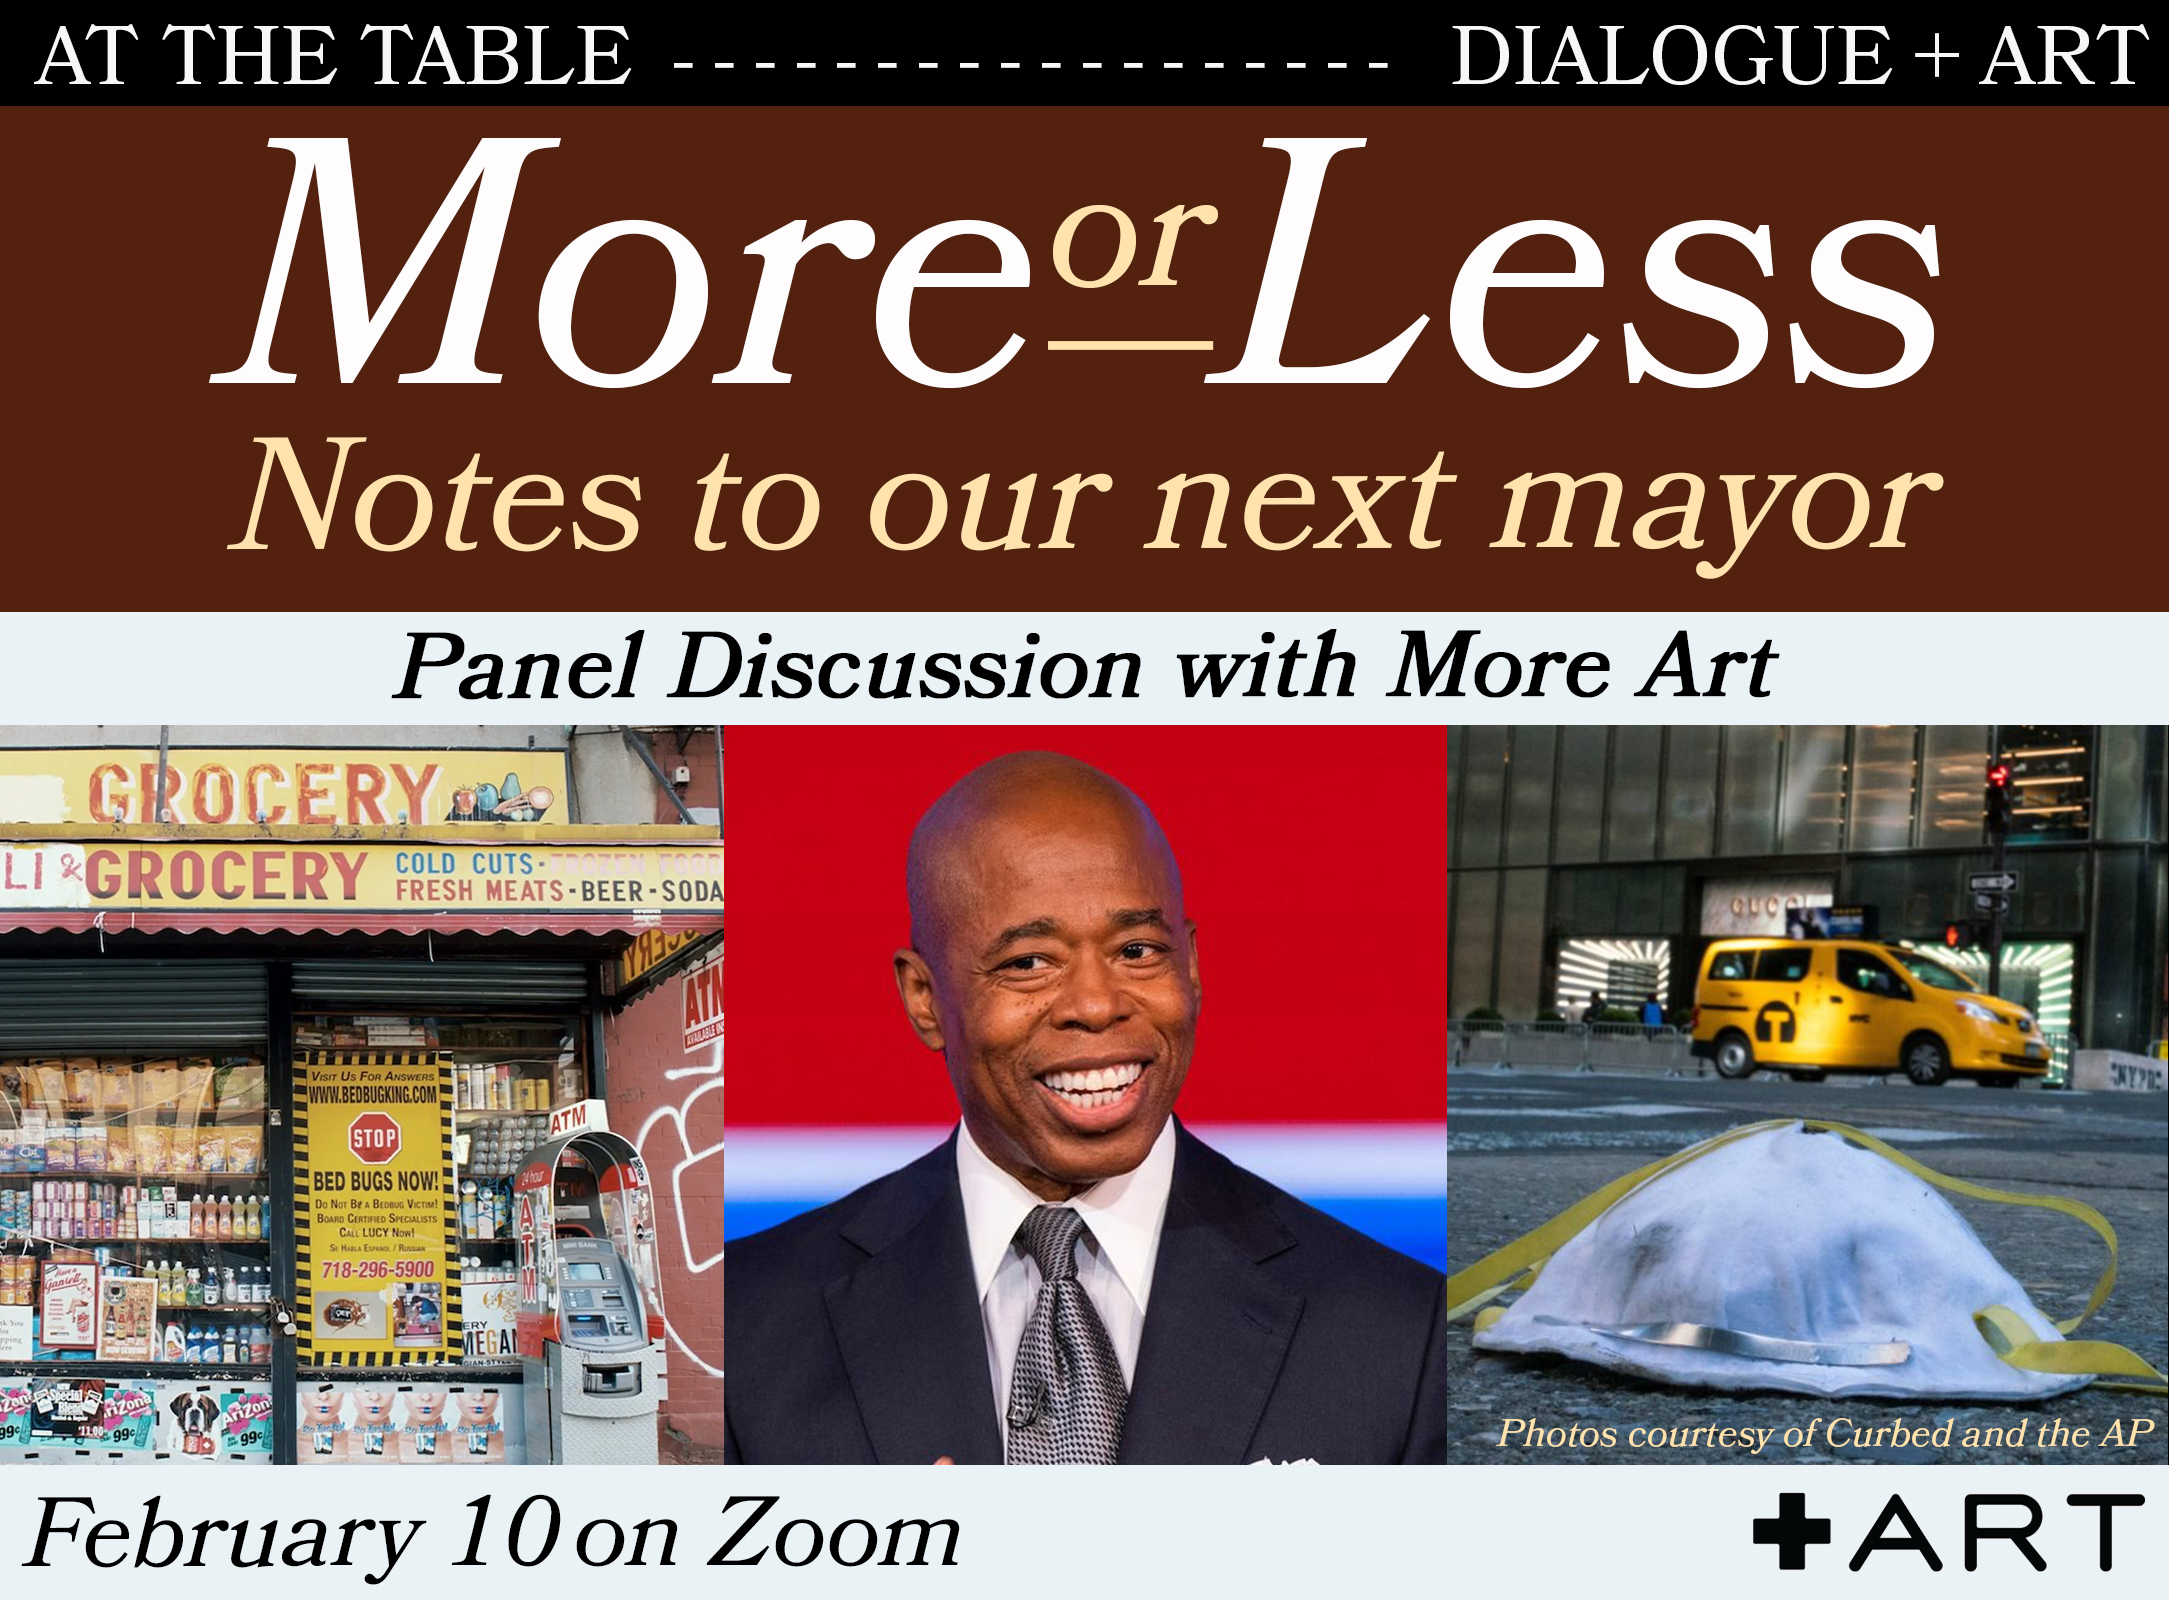 More or Less: Notes to our next mayor